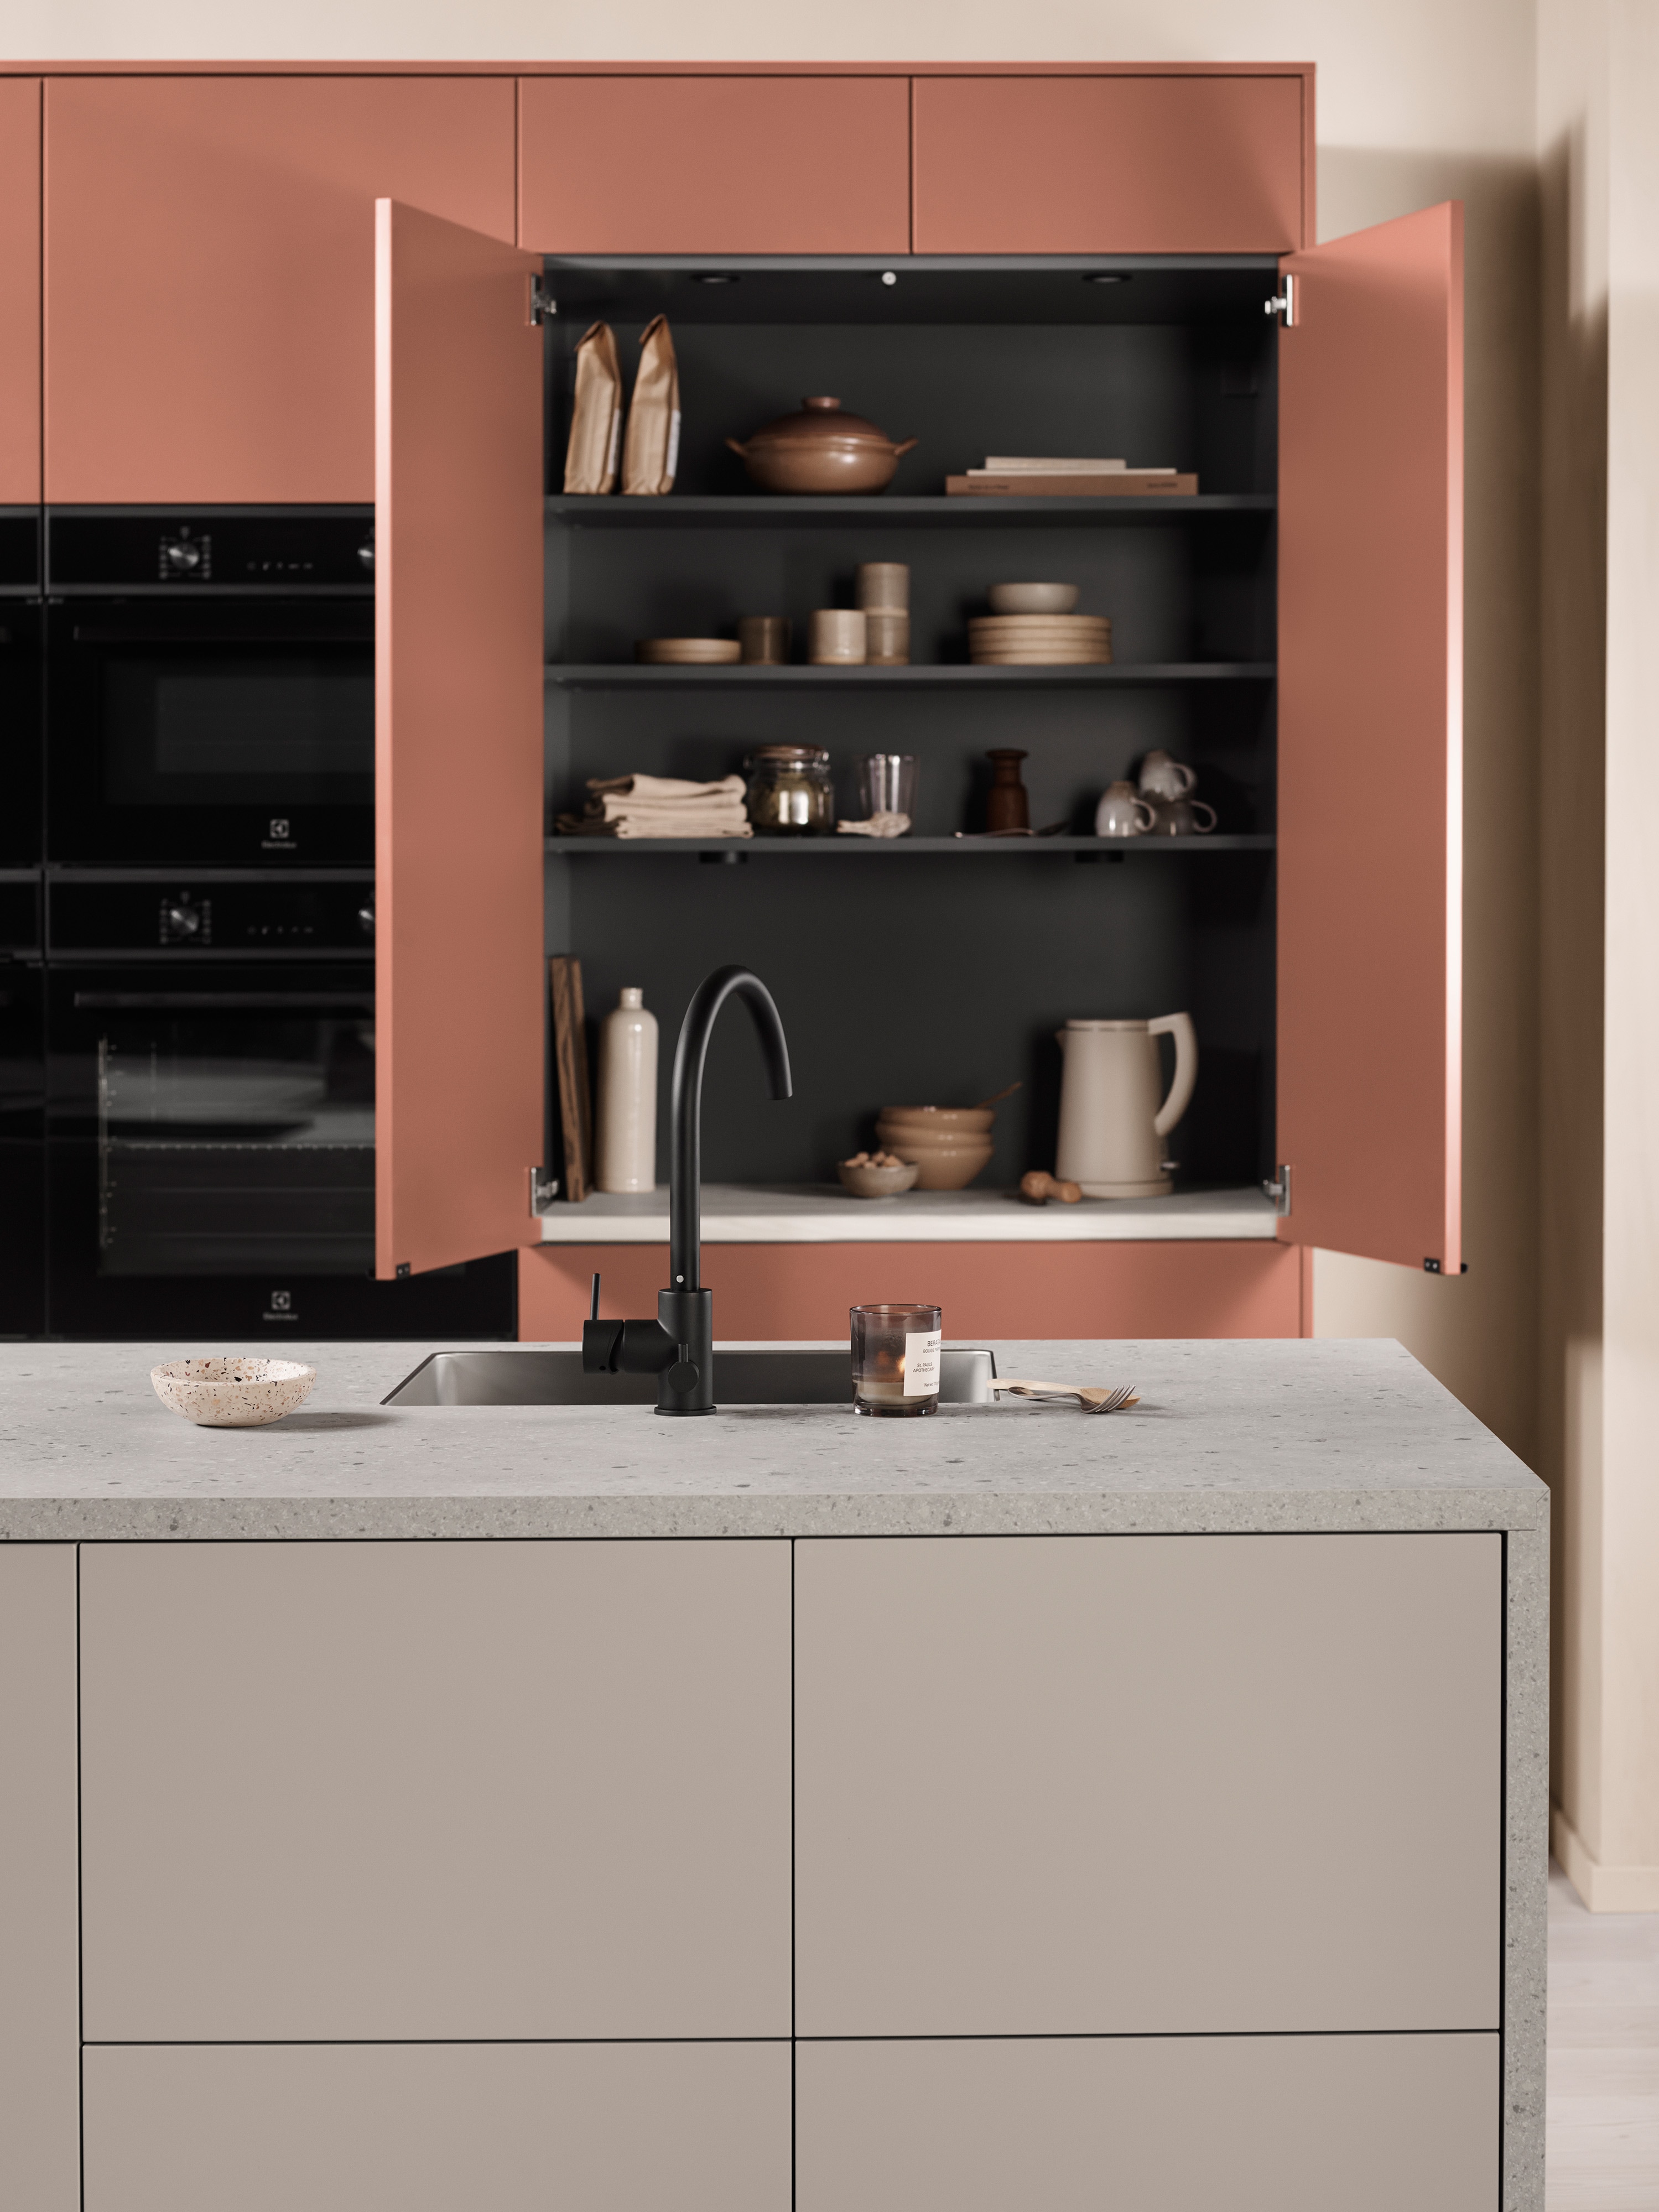 Image collection - Epoq kitchen without handles 